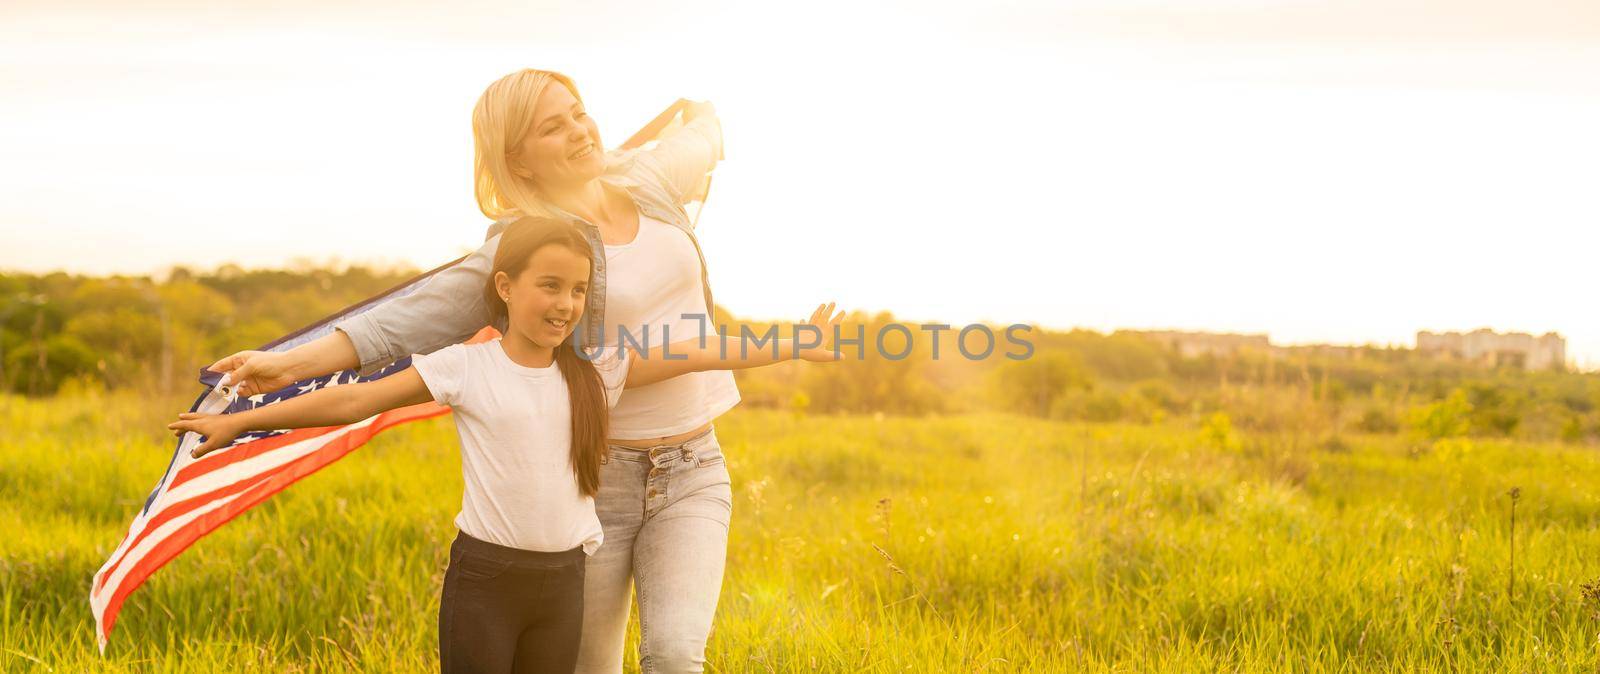 Patriotic holiday. Happy family, mother and her daughter child girl with American flag outdoors. USA celebrate 4th of July.